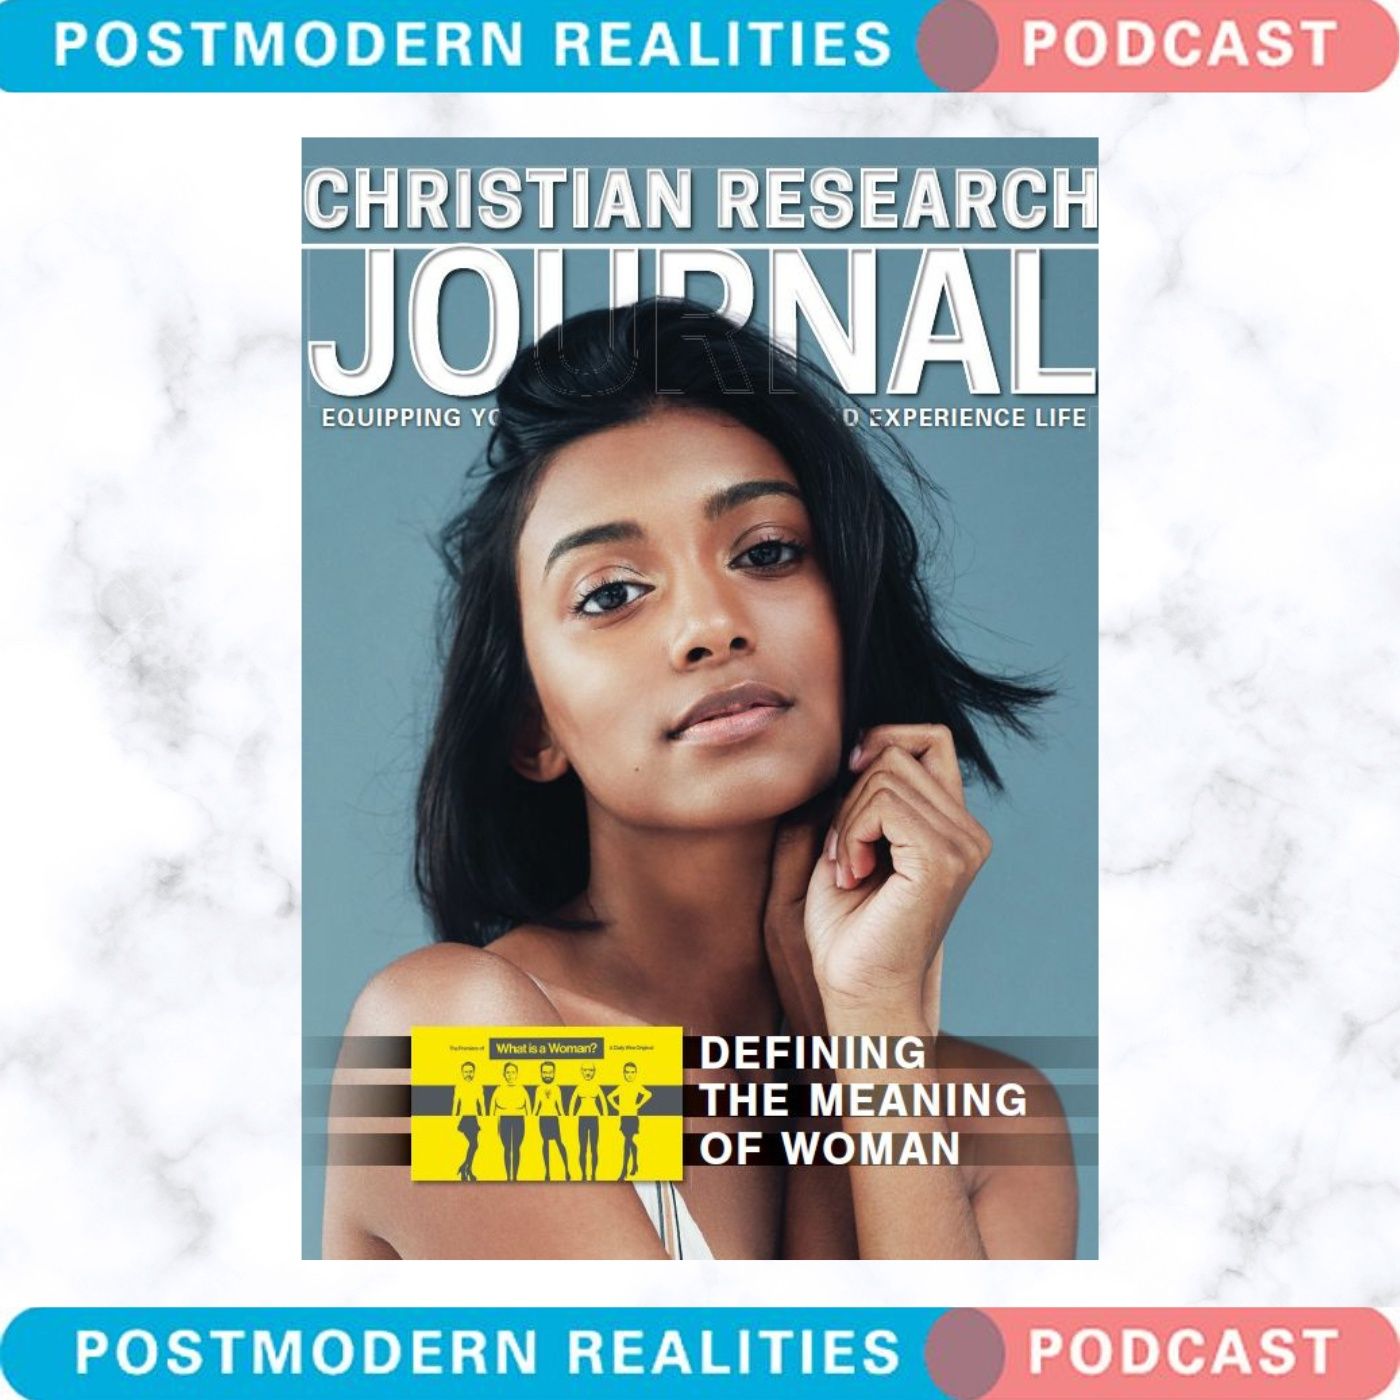 Postmodern Realities Episode 323 Why Do We Exist? Opposite Answers from Buddhism and Christianity